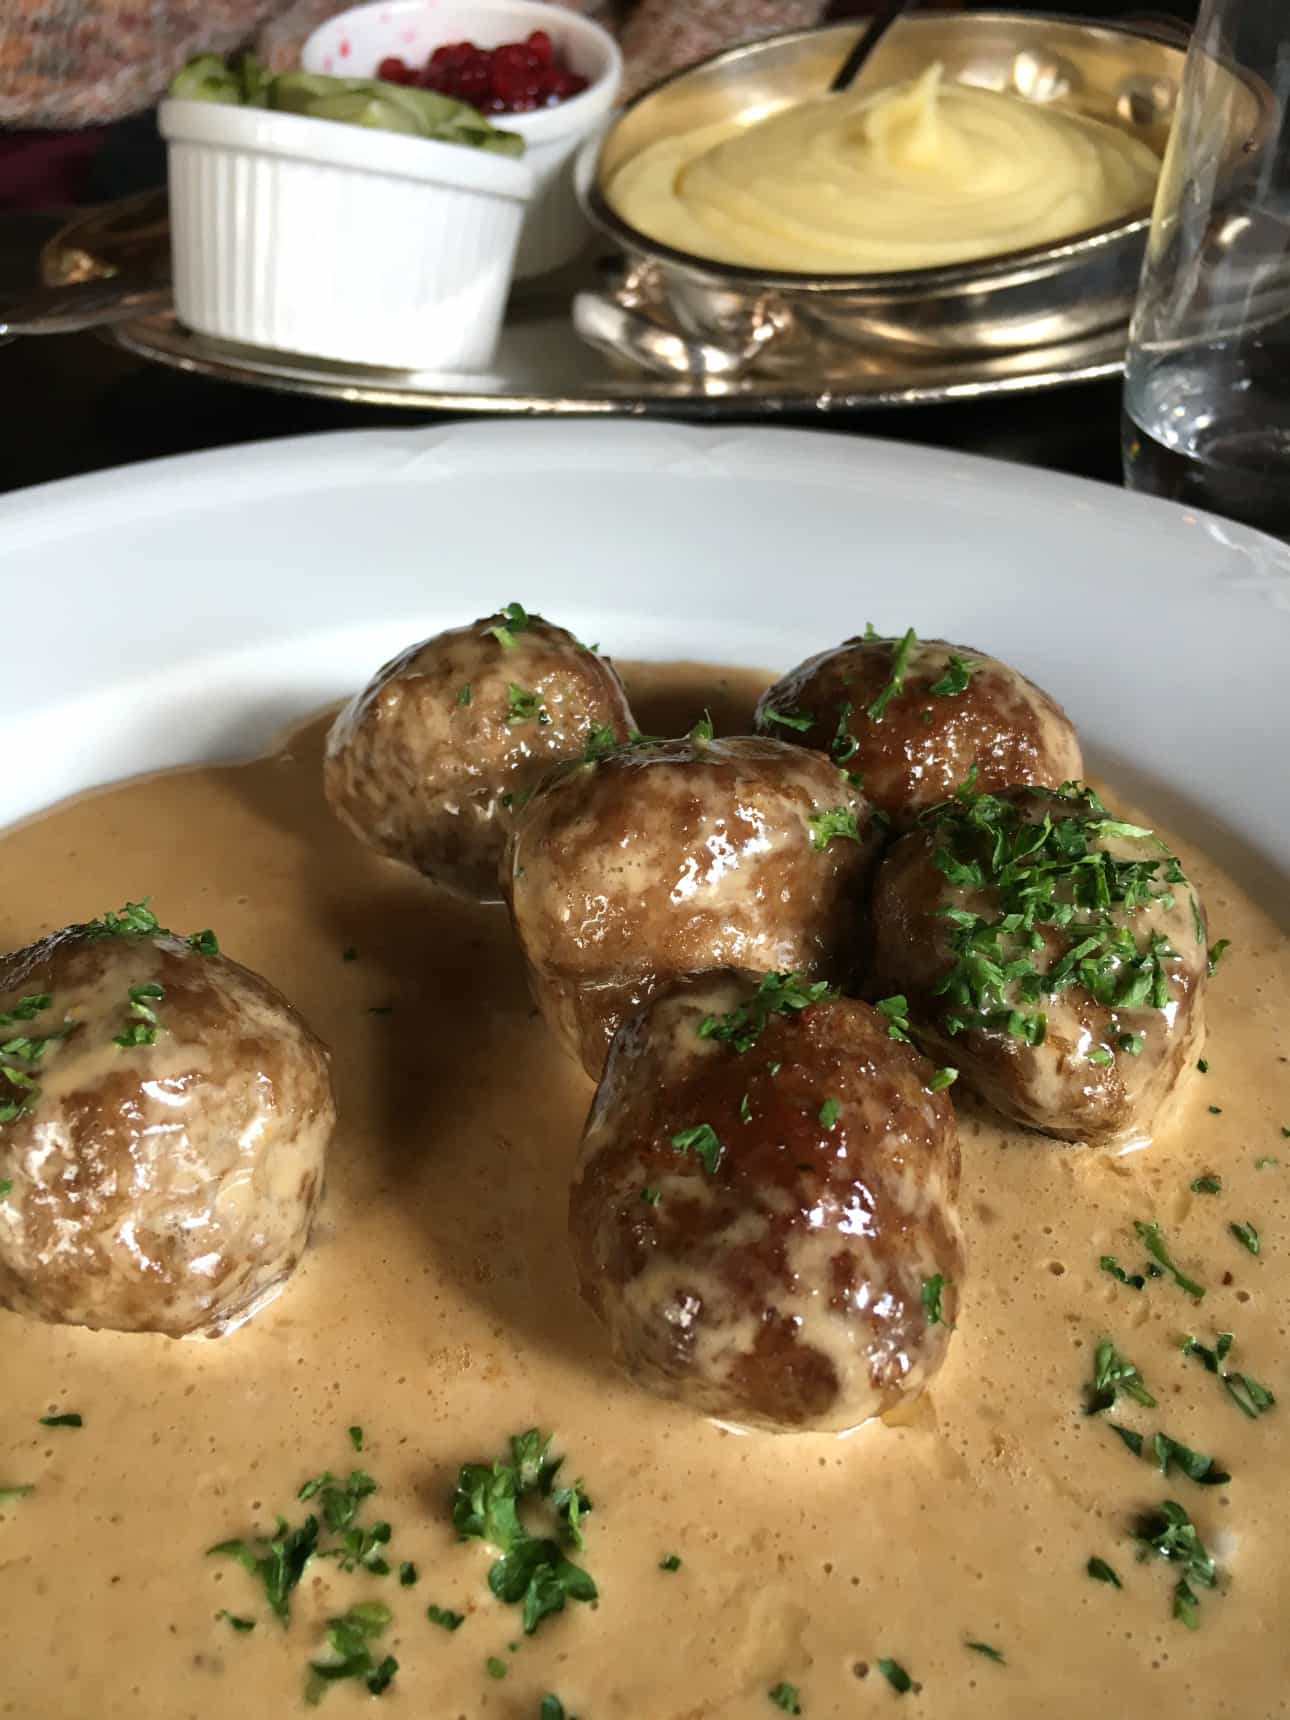 Authentic Swedish Meatballs from Stockholm, Sweden